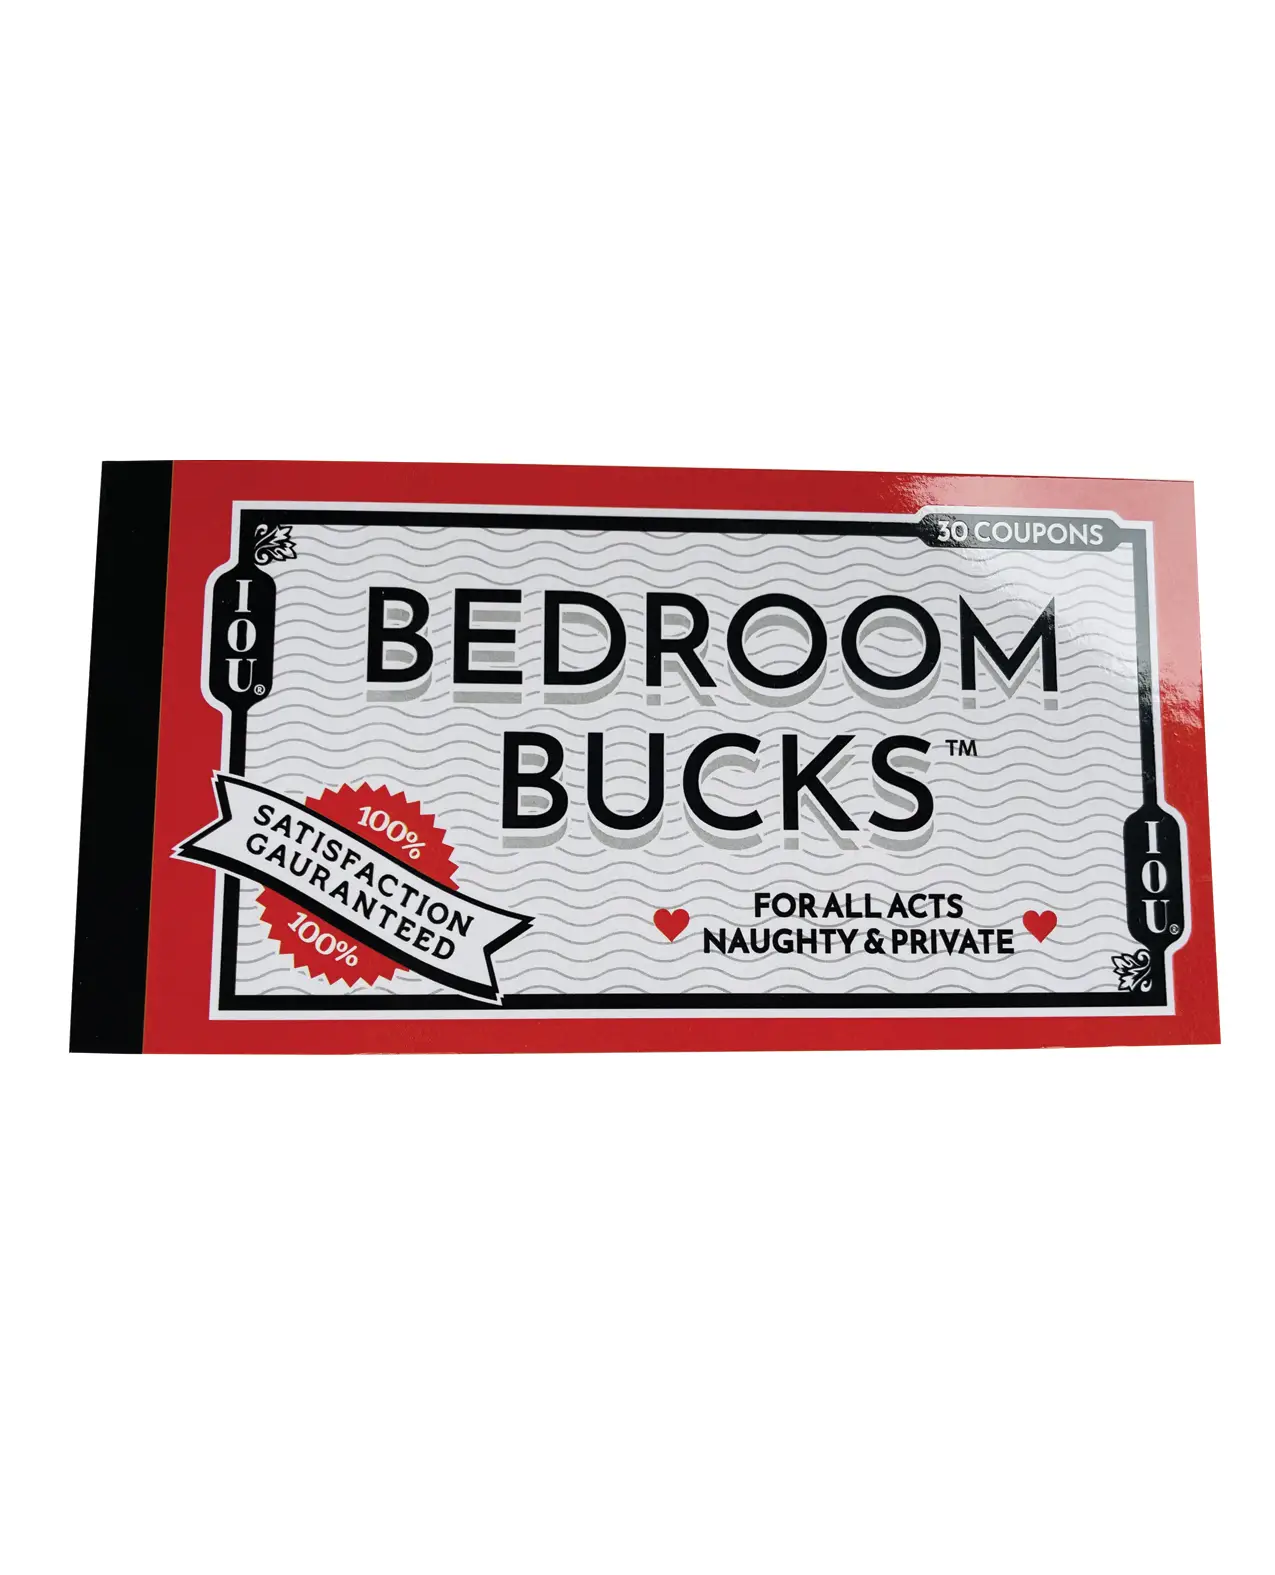 Bedroom Bucks I.O.U. For all acts, naughty and private. IOU coupon book.